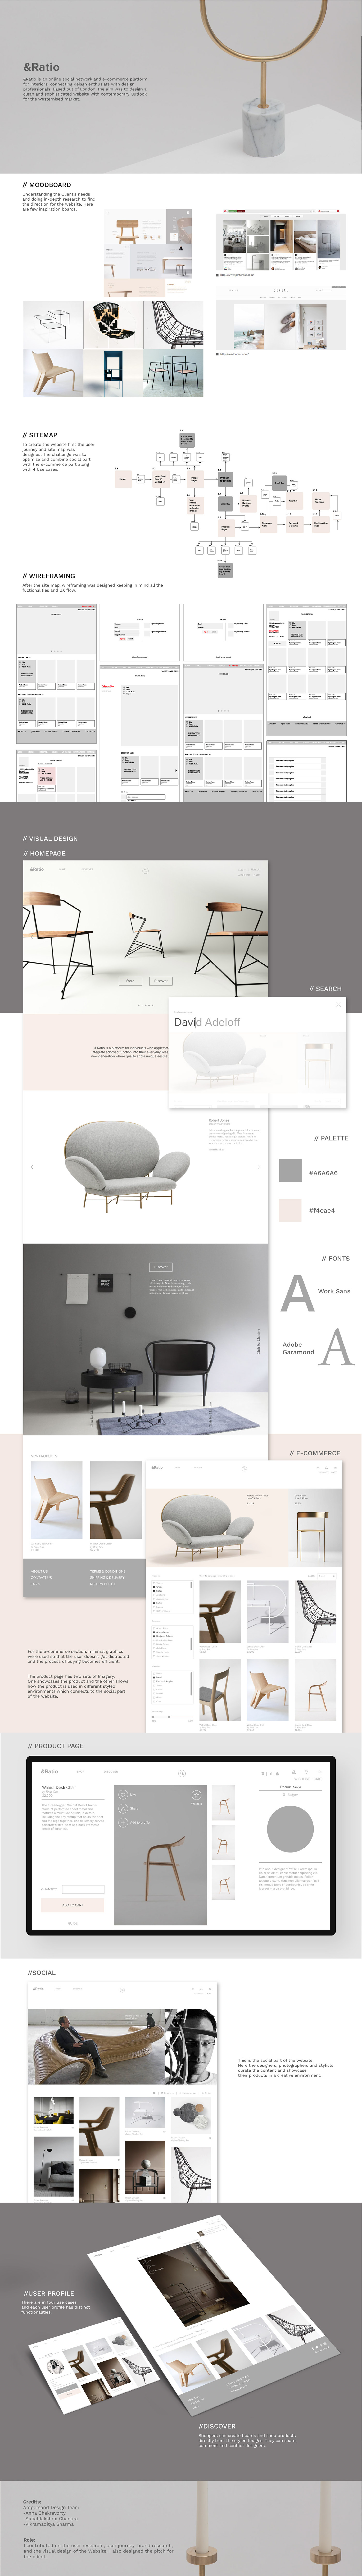 Interface Experience Ecommerce social Website ux clean Interior furniture